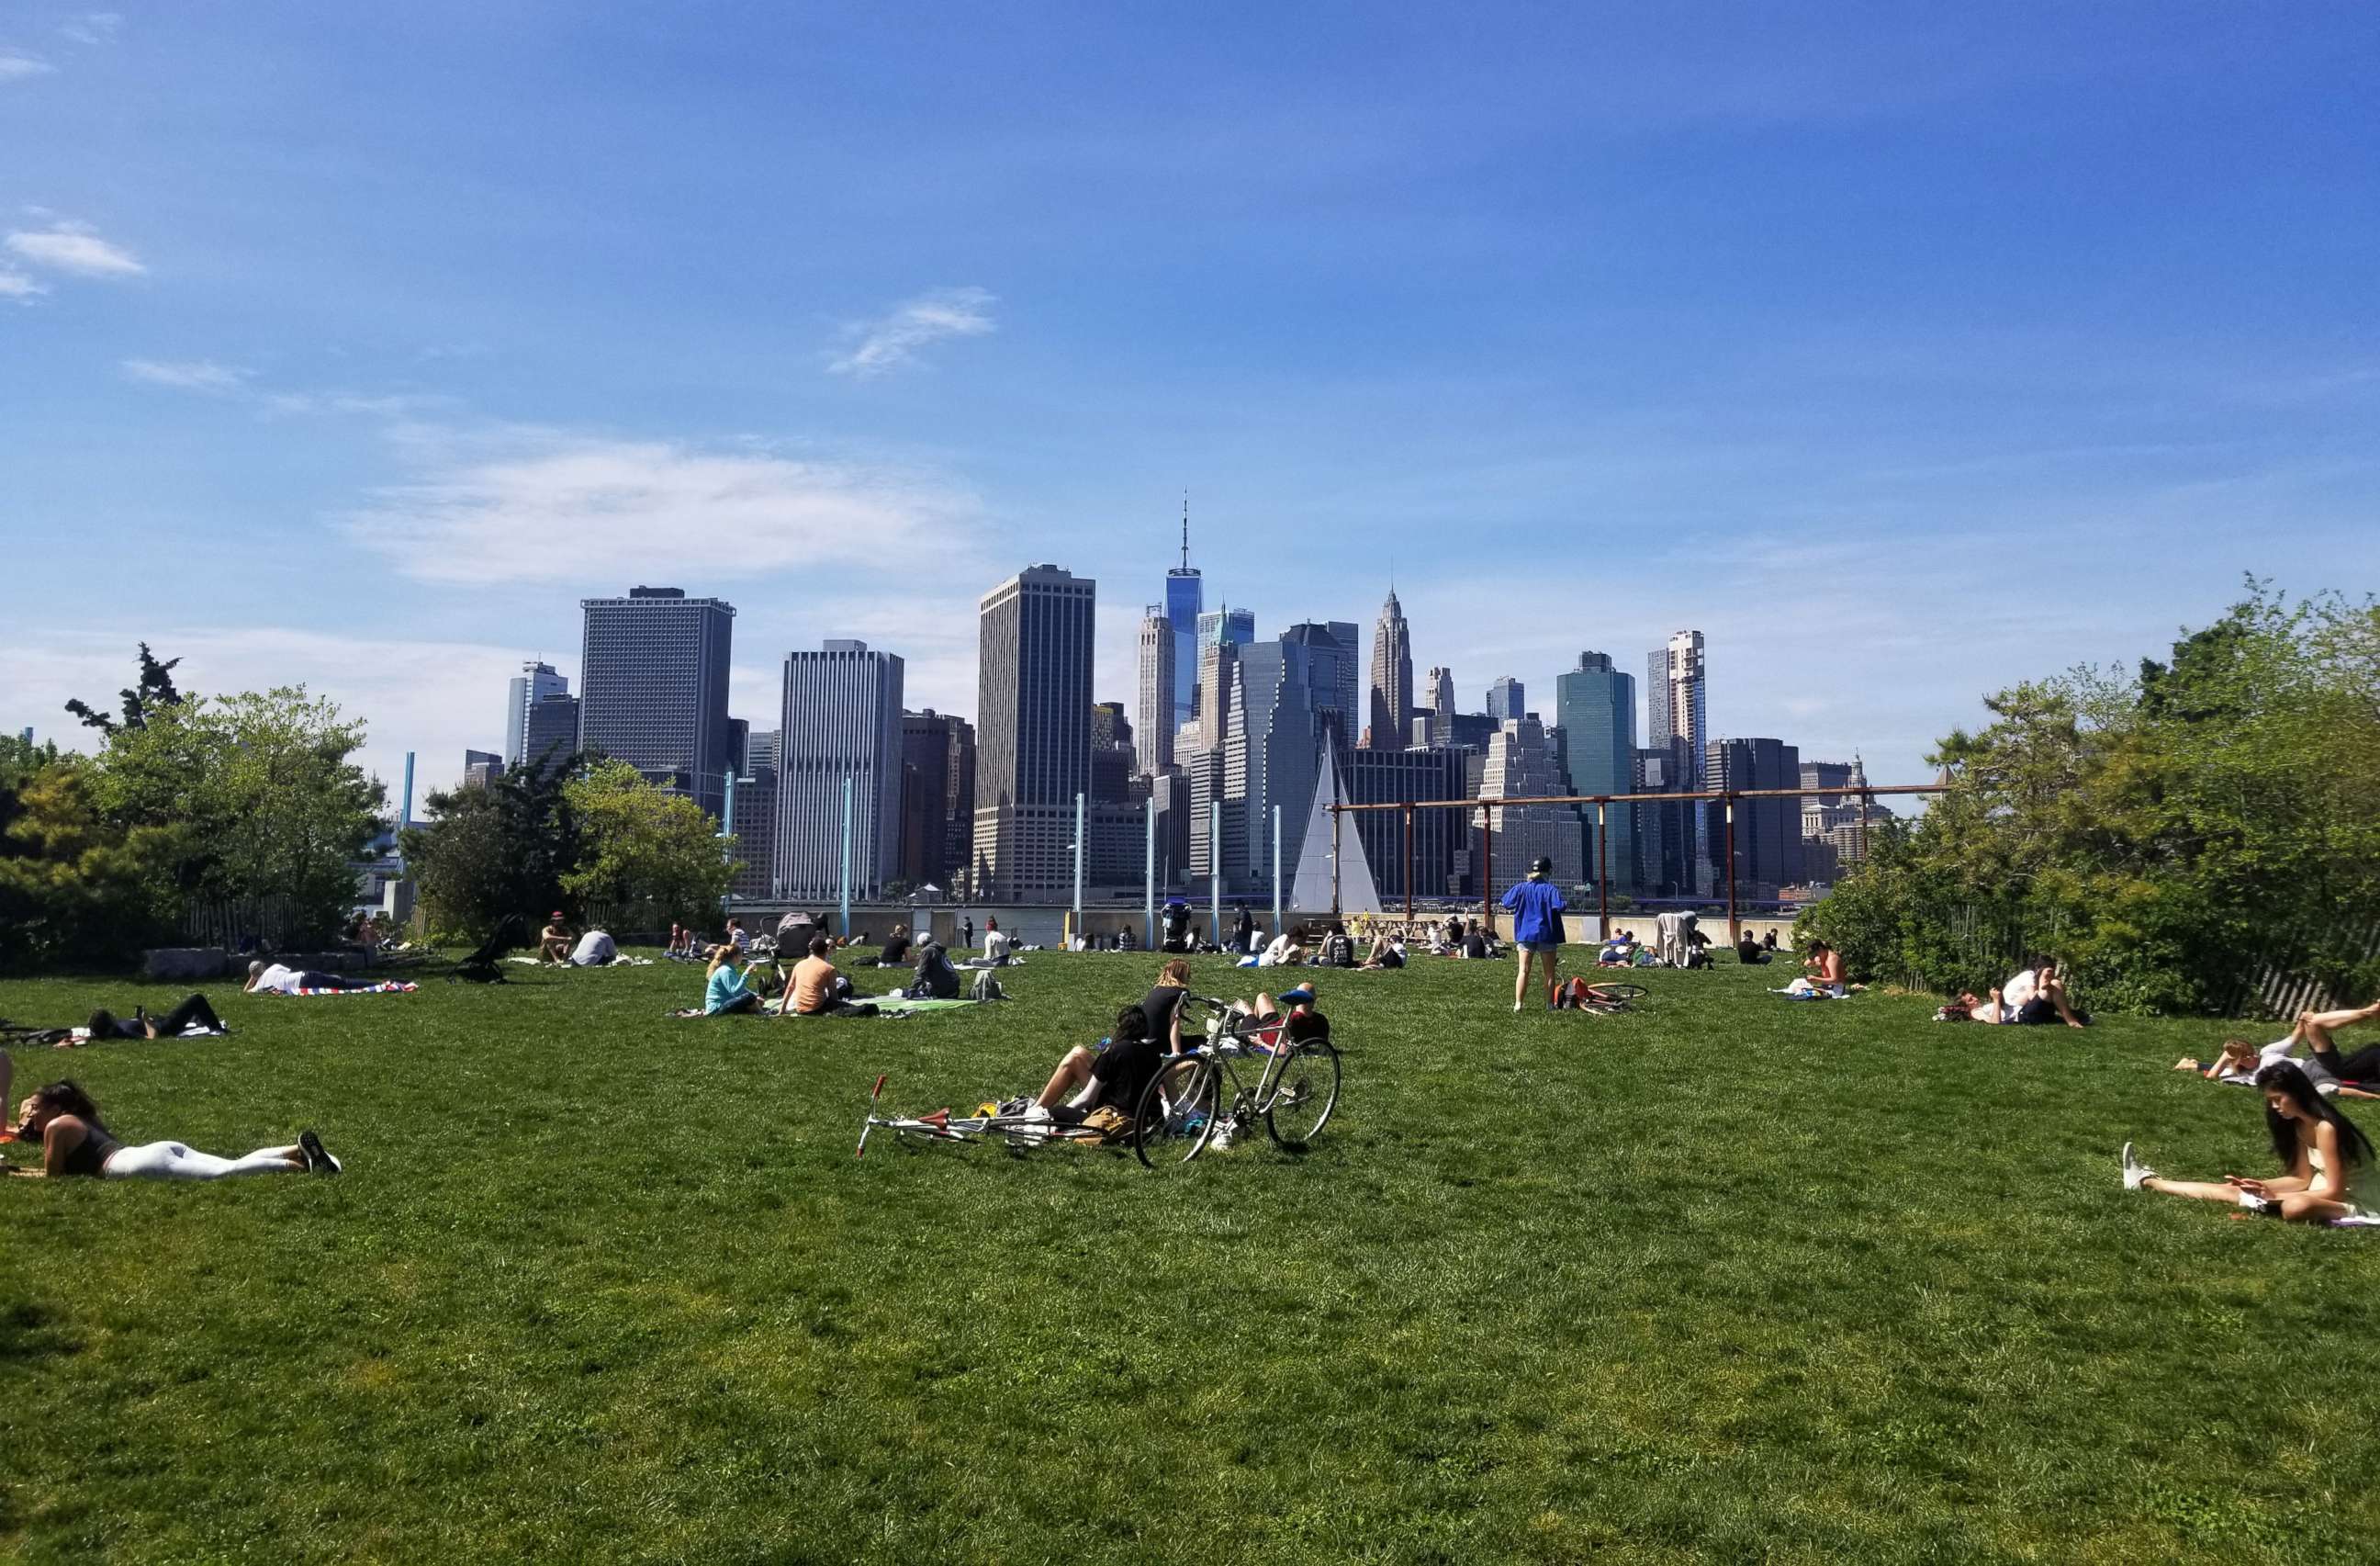 PHOTO: People enjoy a spring day at the Brooklyn Bridge Park Pier 6 during the coronavirus pandemic on May 17, 2020 in Brooklyn, New York.